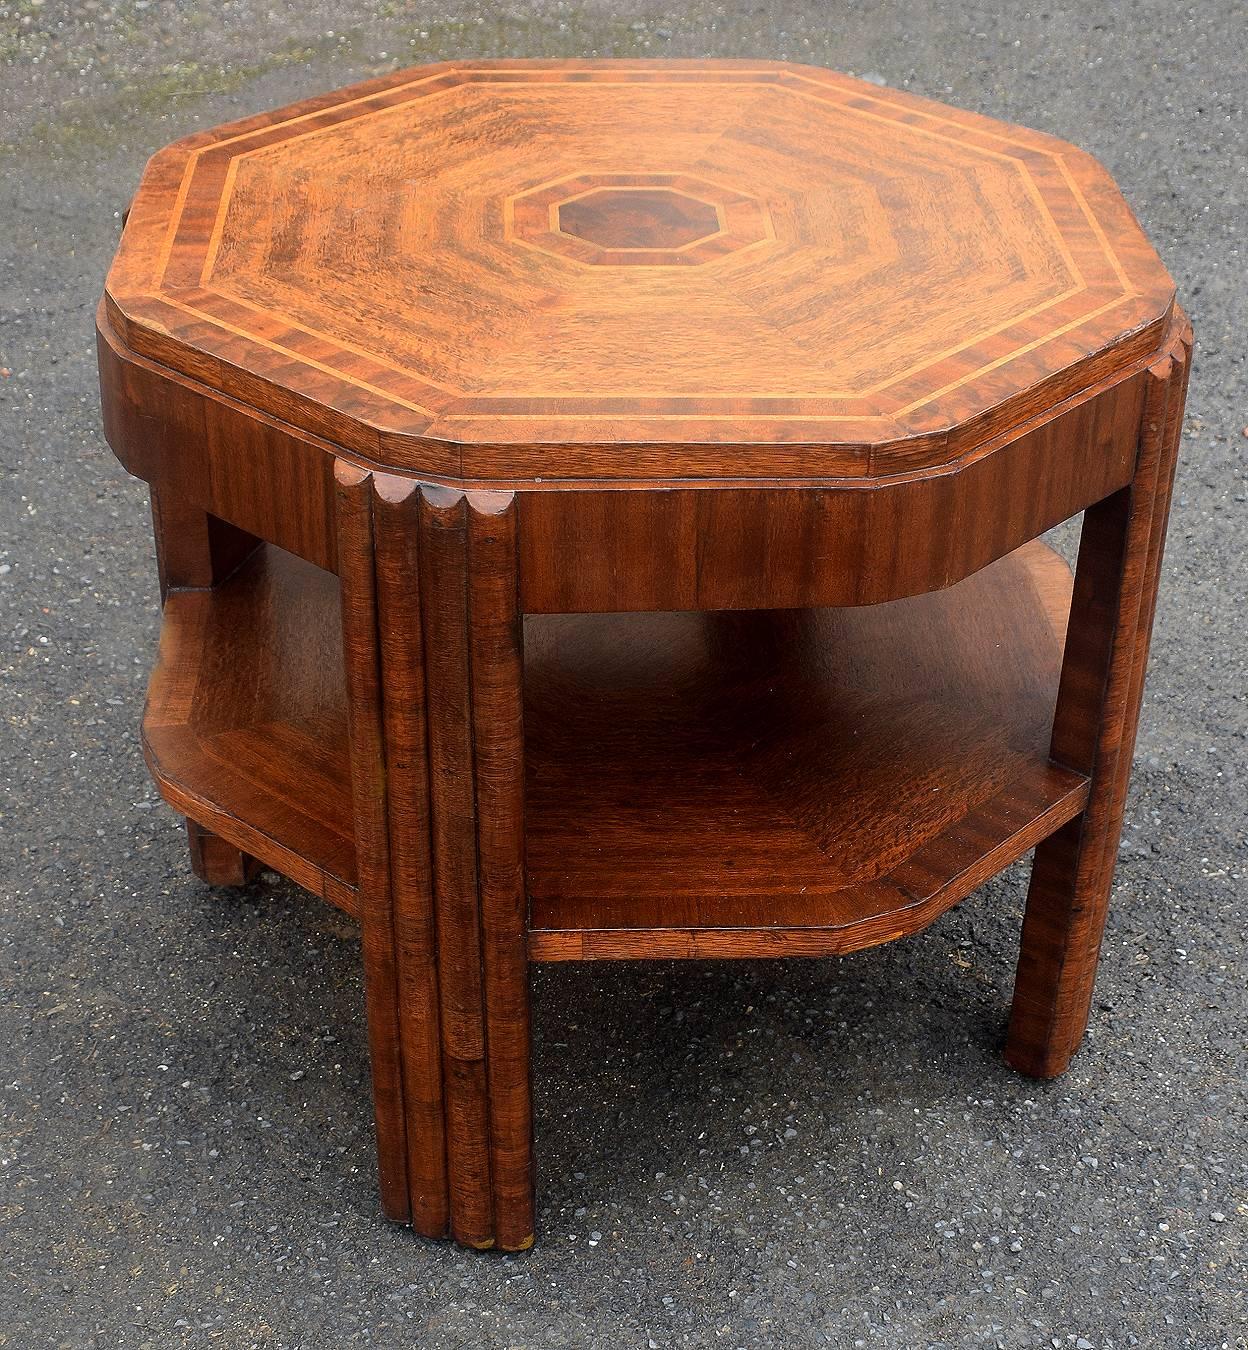 Very stylish Art Deco English table dating to the 1930s. A very fine example that can be used for multiple purposes, a centre, end, book, coffee table. An innovative design sets this Art Deco occasional or book table apart from run of the mill.